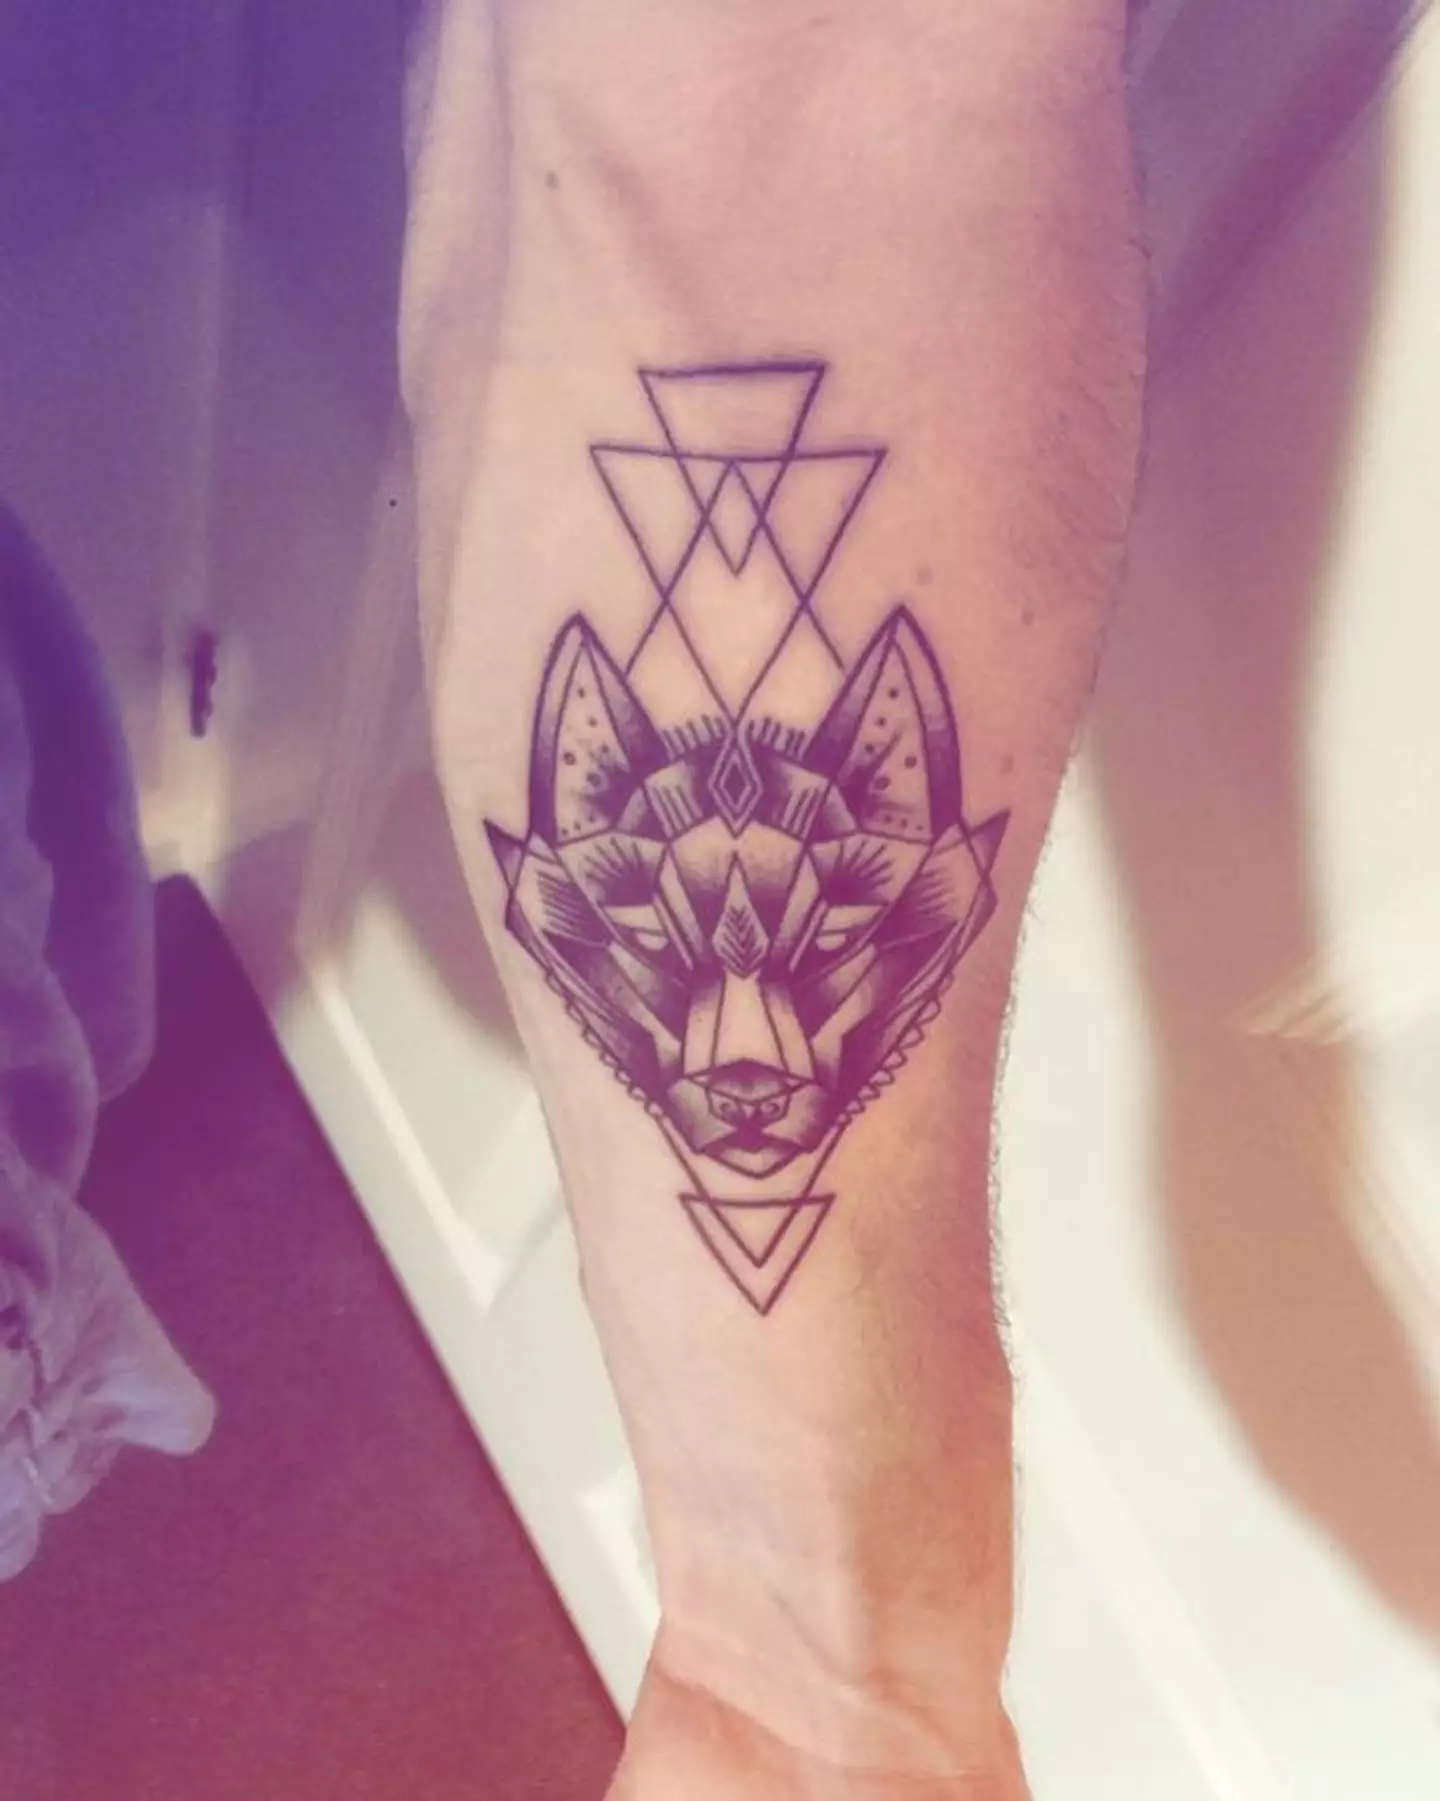 The wolf tattoo is on his arm.